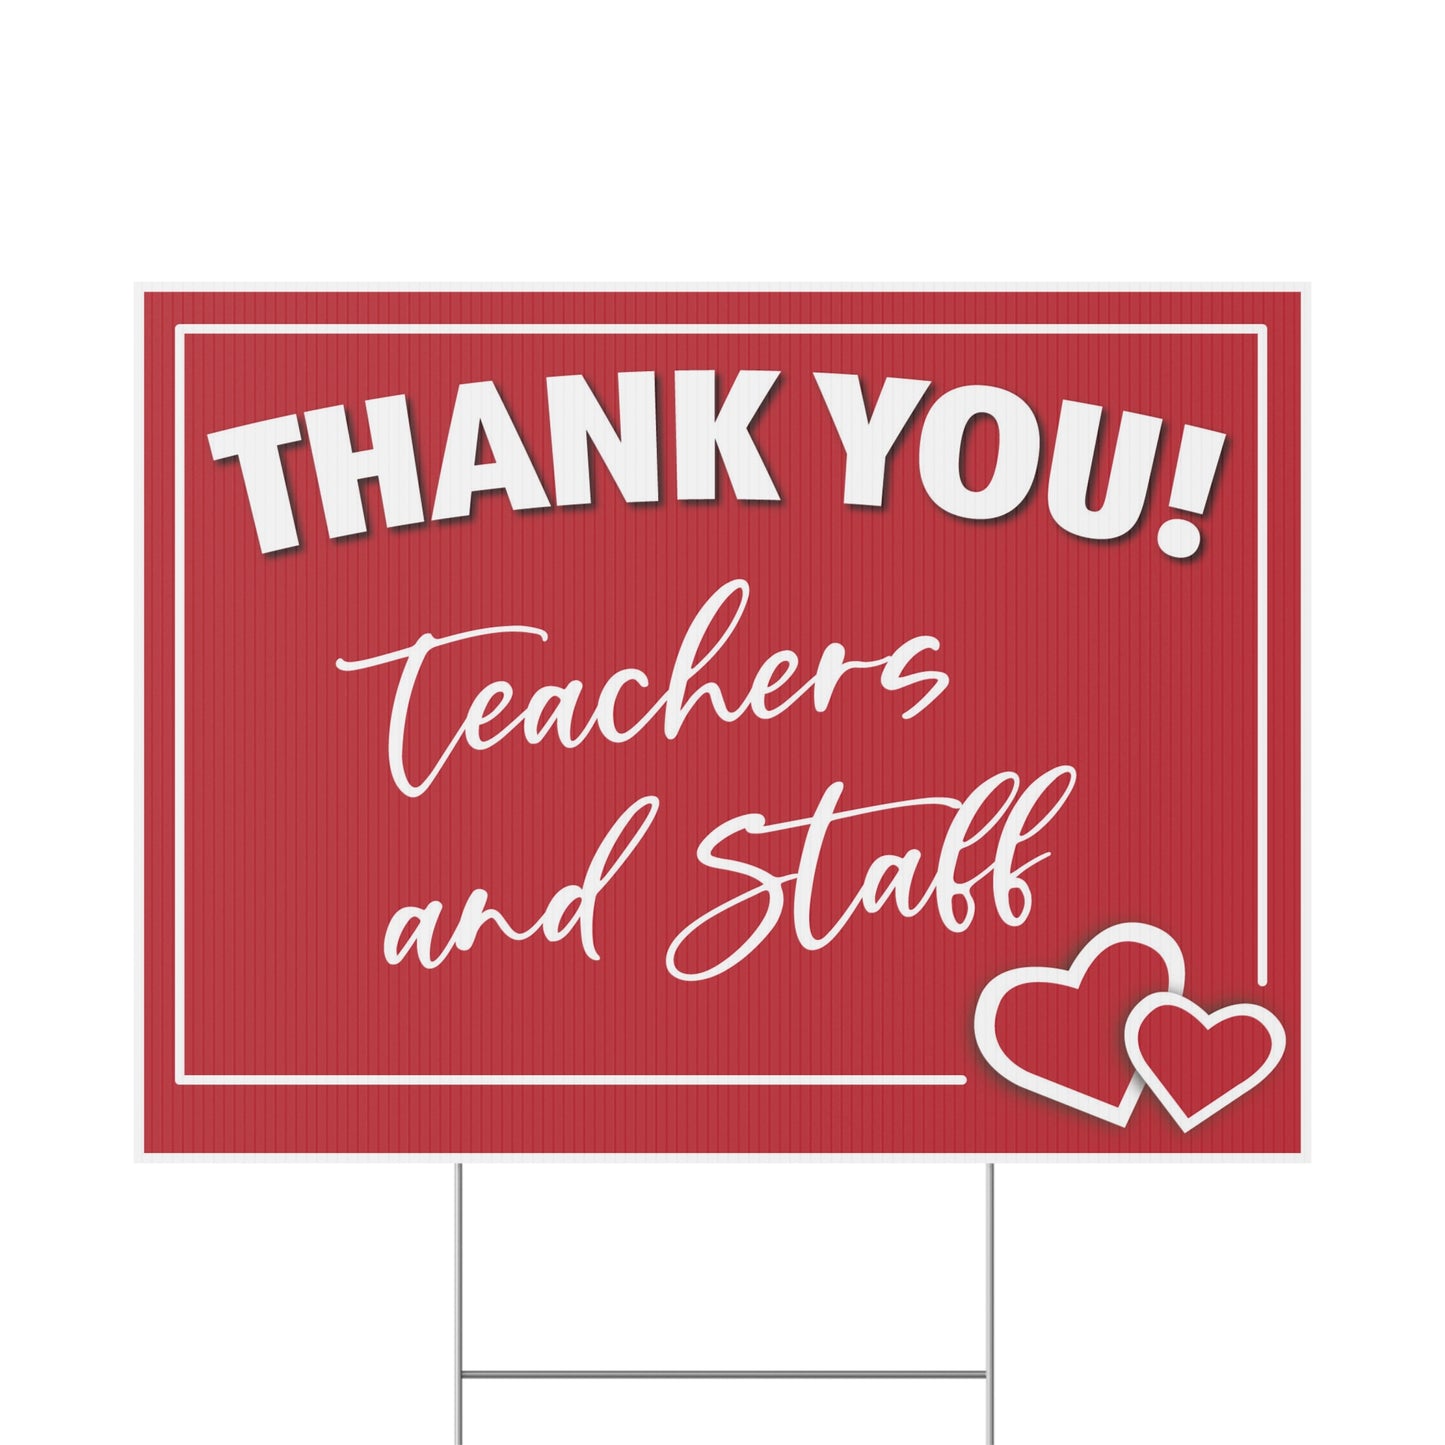 Thank You Teachers and Staff, Making a Difference, Yard Sign, Printed 2-Sided -18 x 12,24x18 or 36x24, Metal H-Stake Included, v4